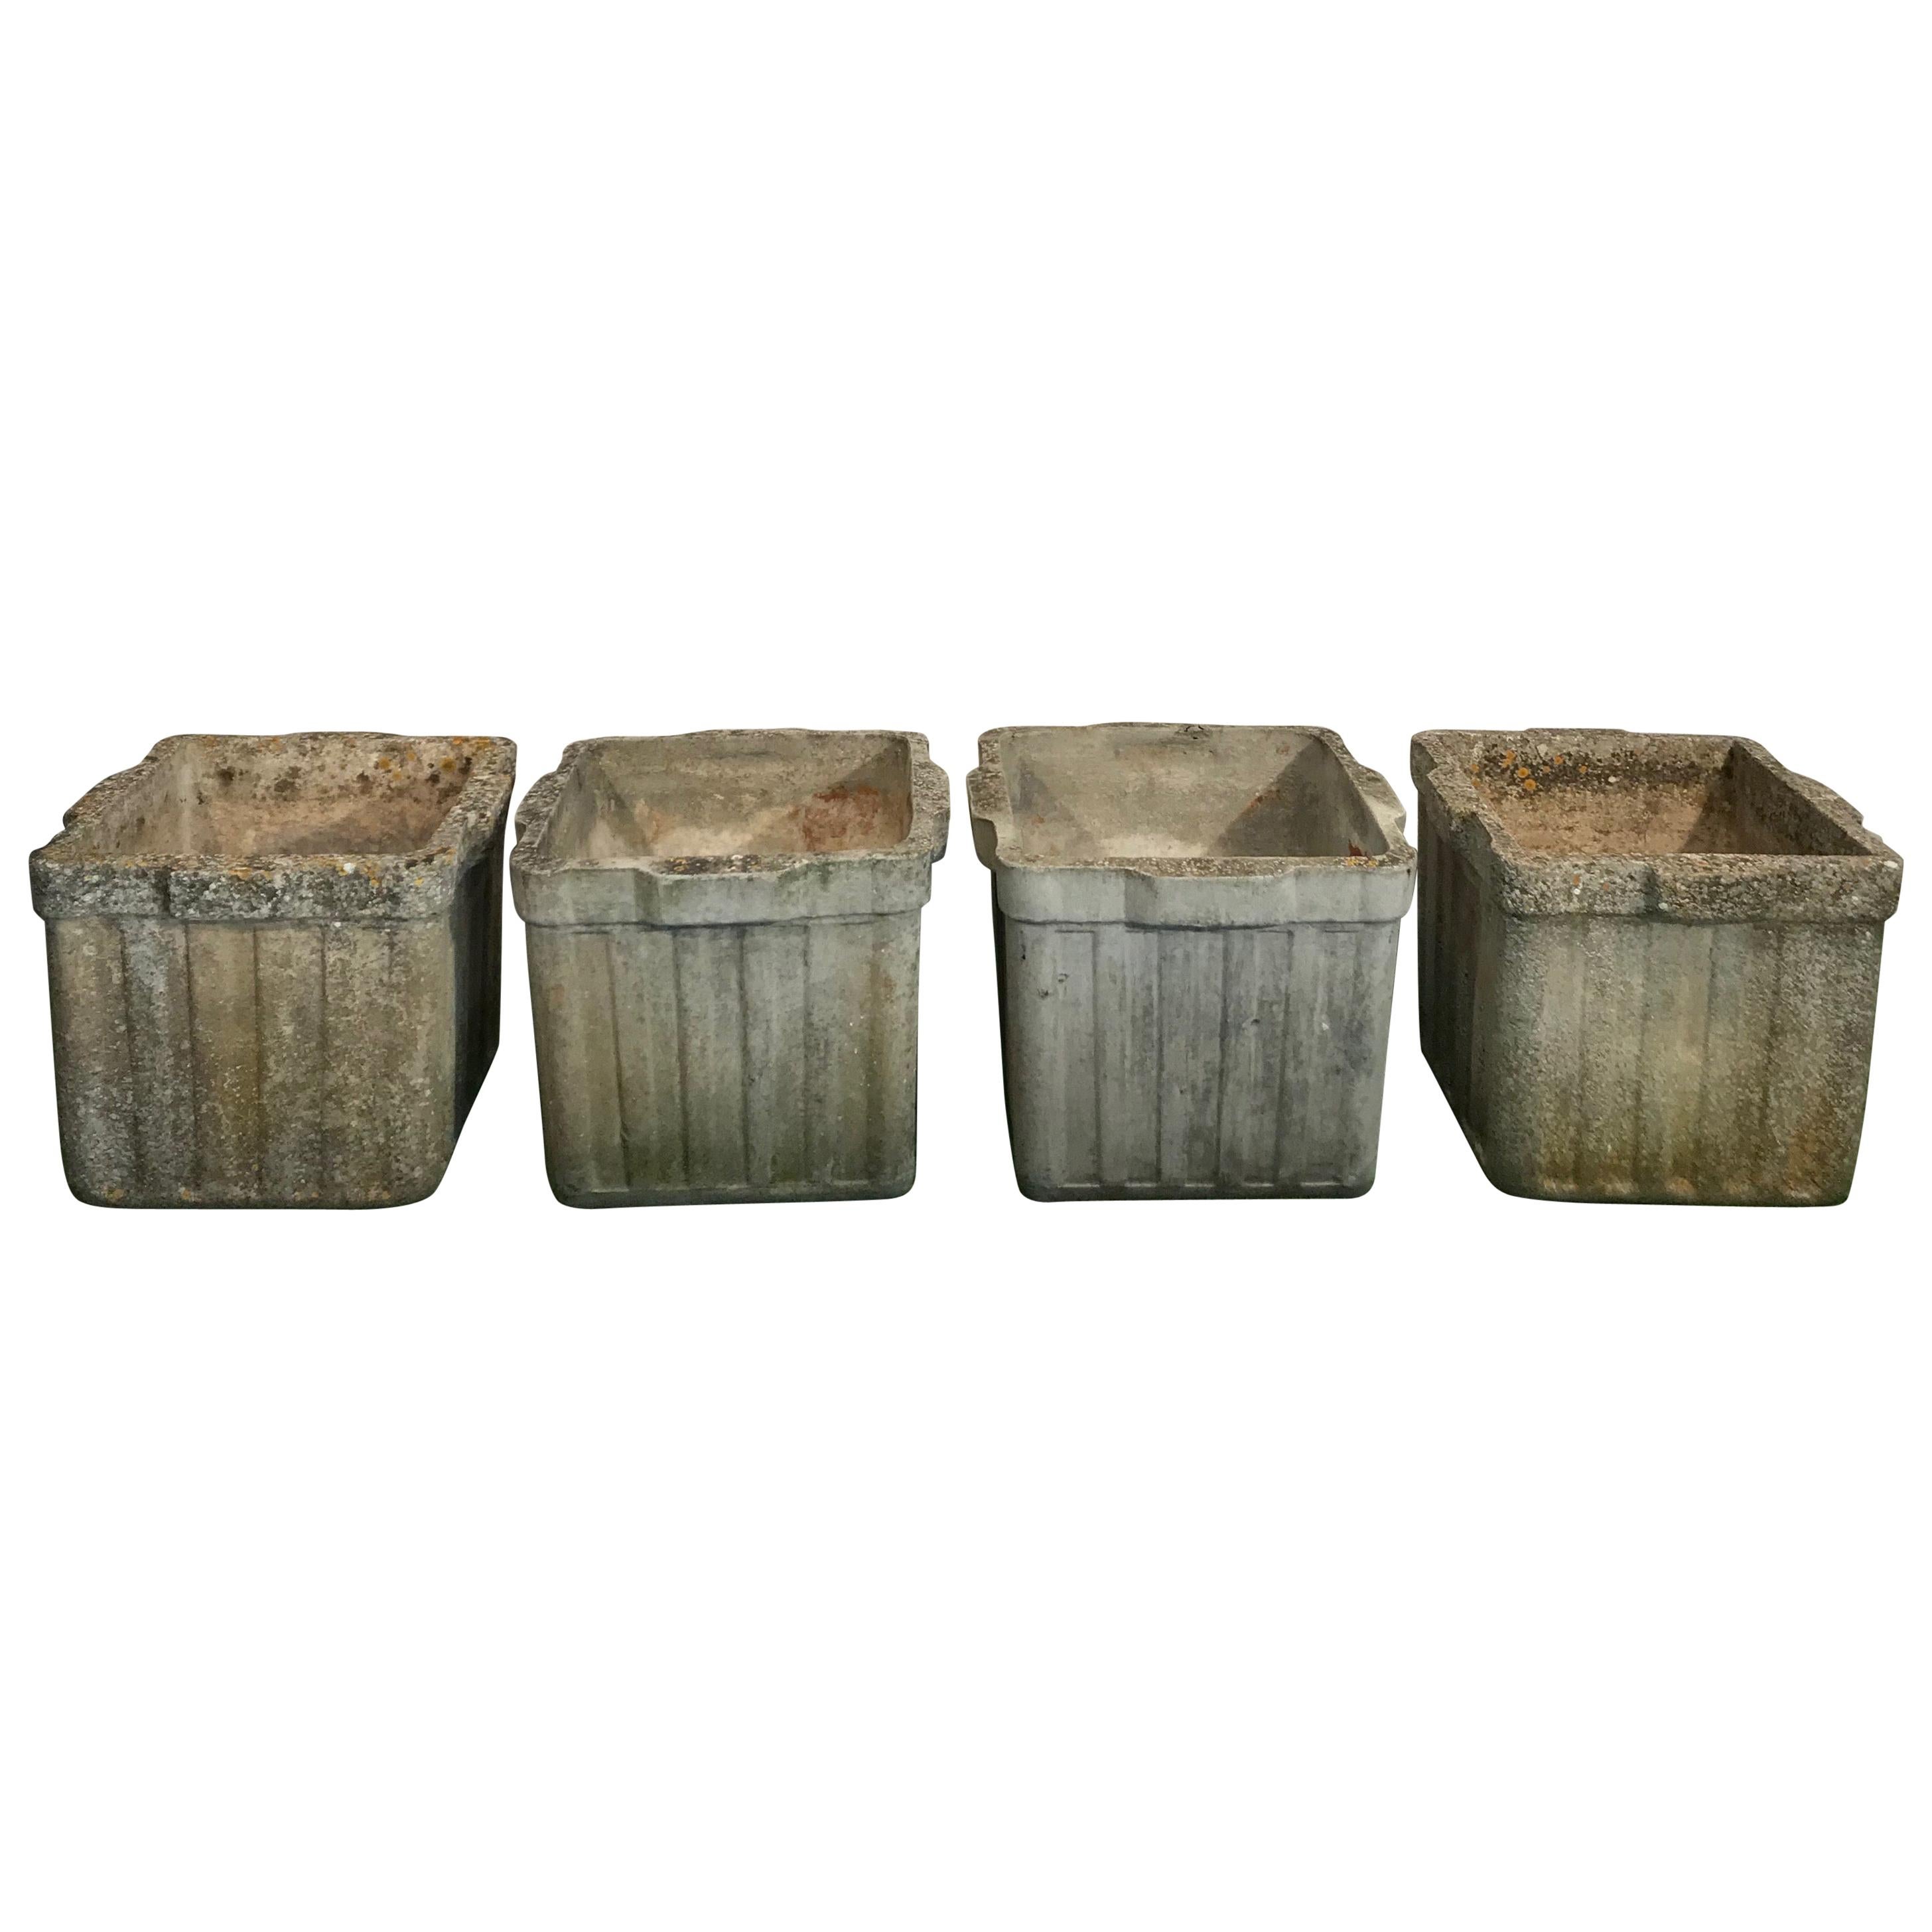 Two Pairs of Square Ribbed Willy Guhl Planters by Eternit with Lovely Patina